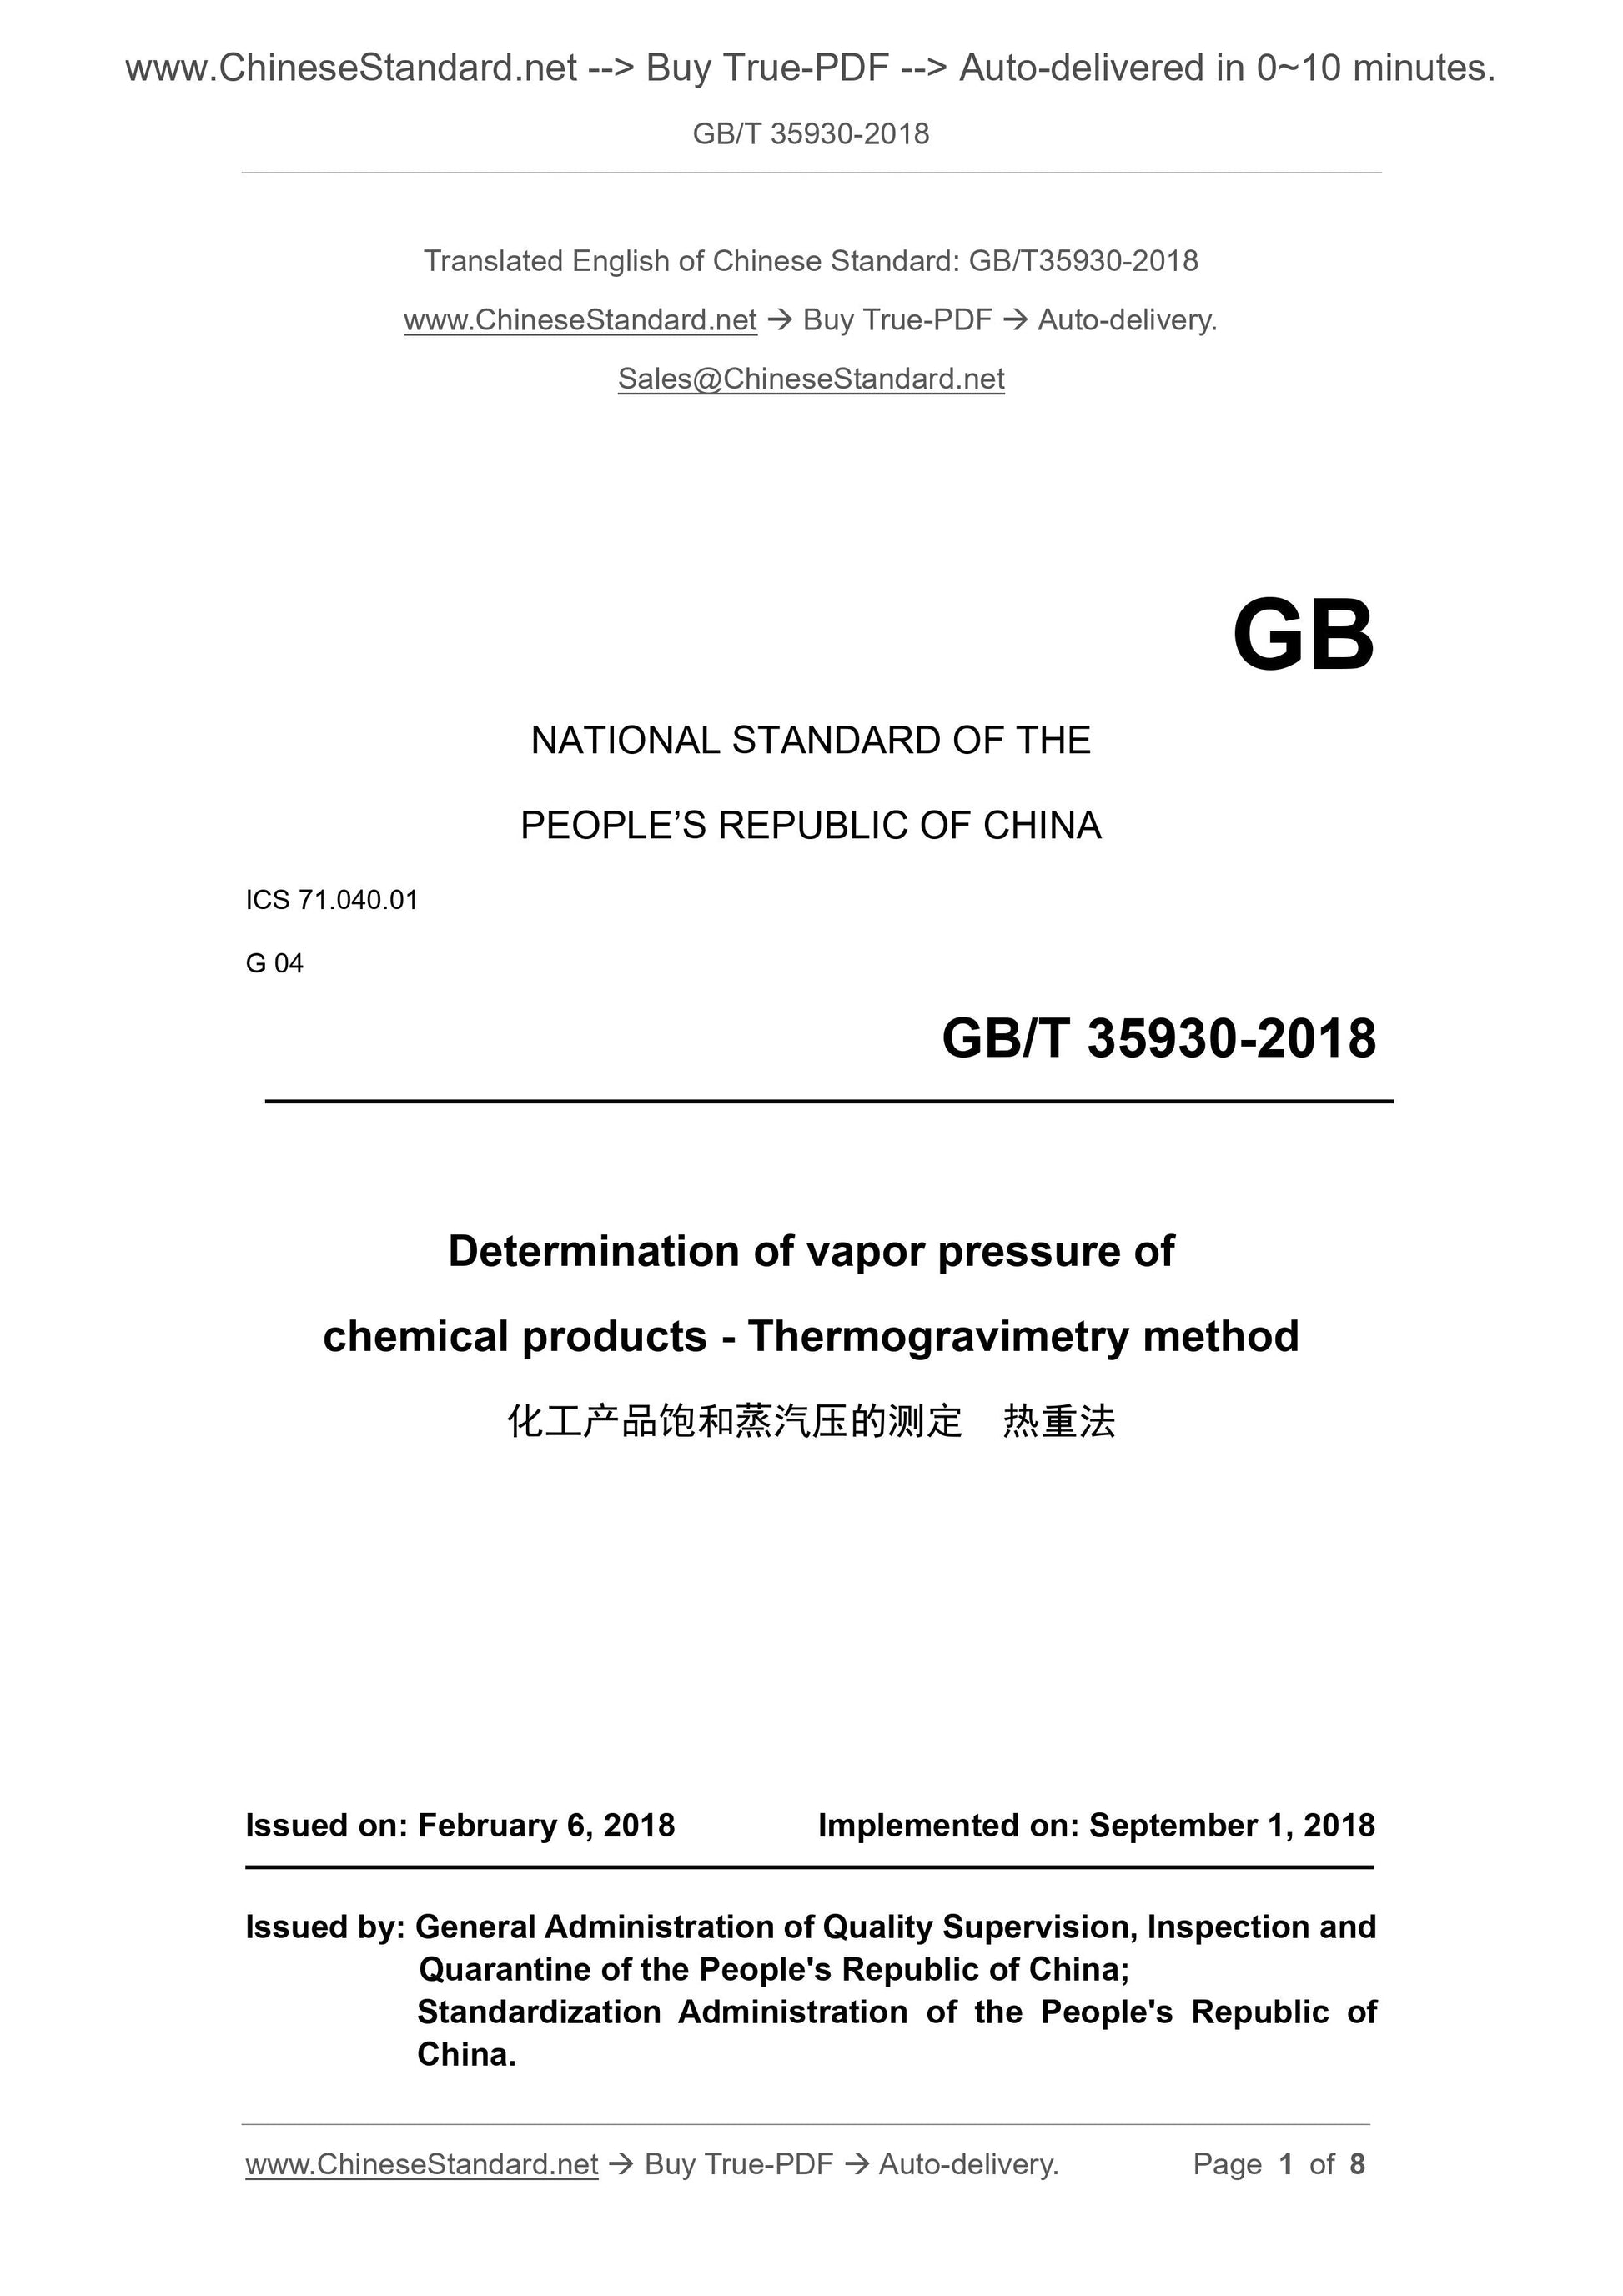 GB/T 35930-2018 Page 1